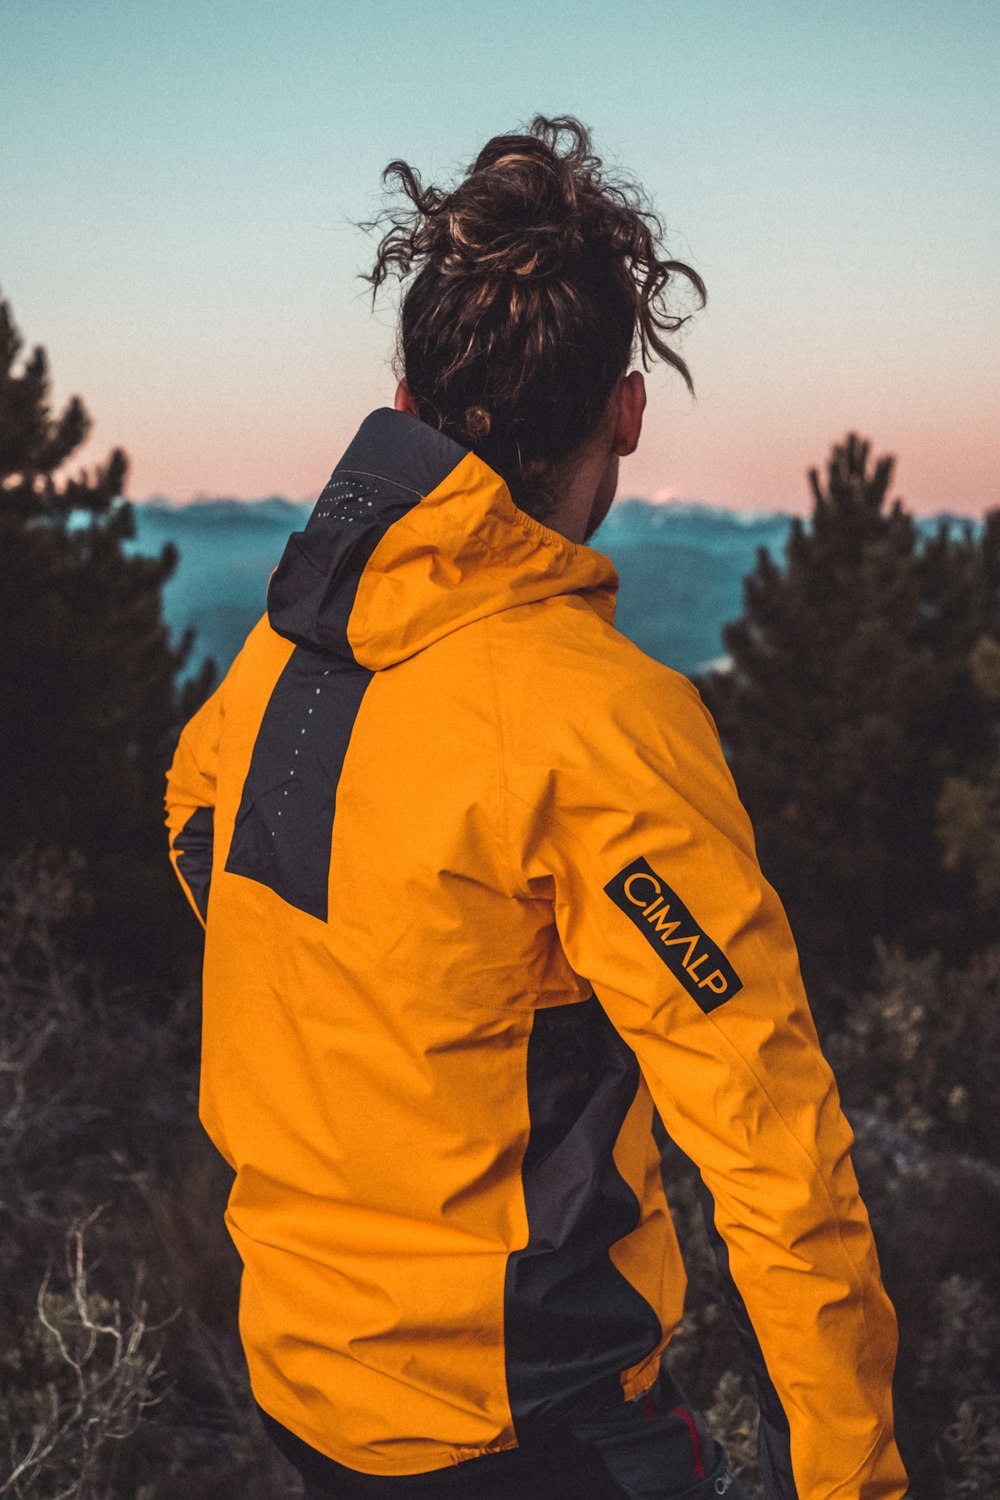 A man in a yellow jacket looking out over the ocean photo – Free France  Image on Unsplash